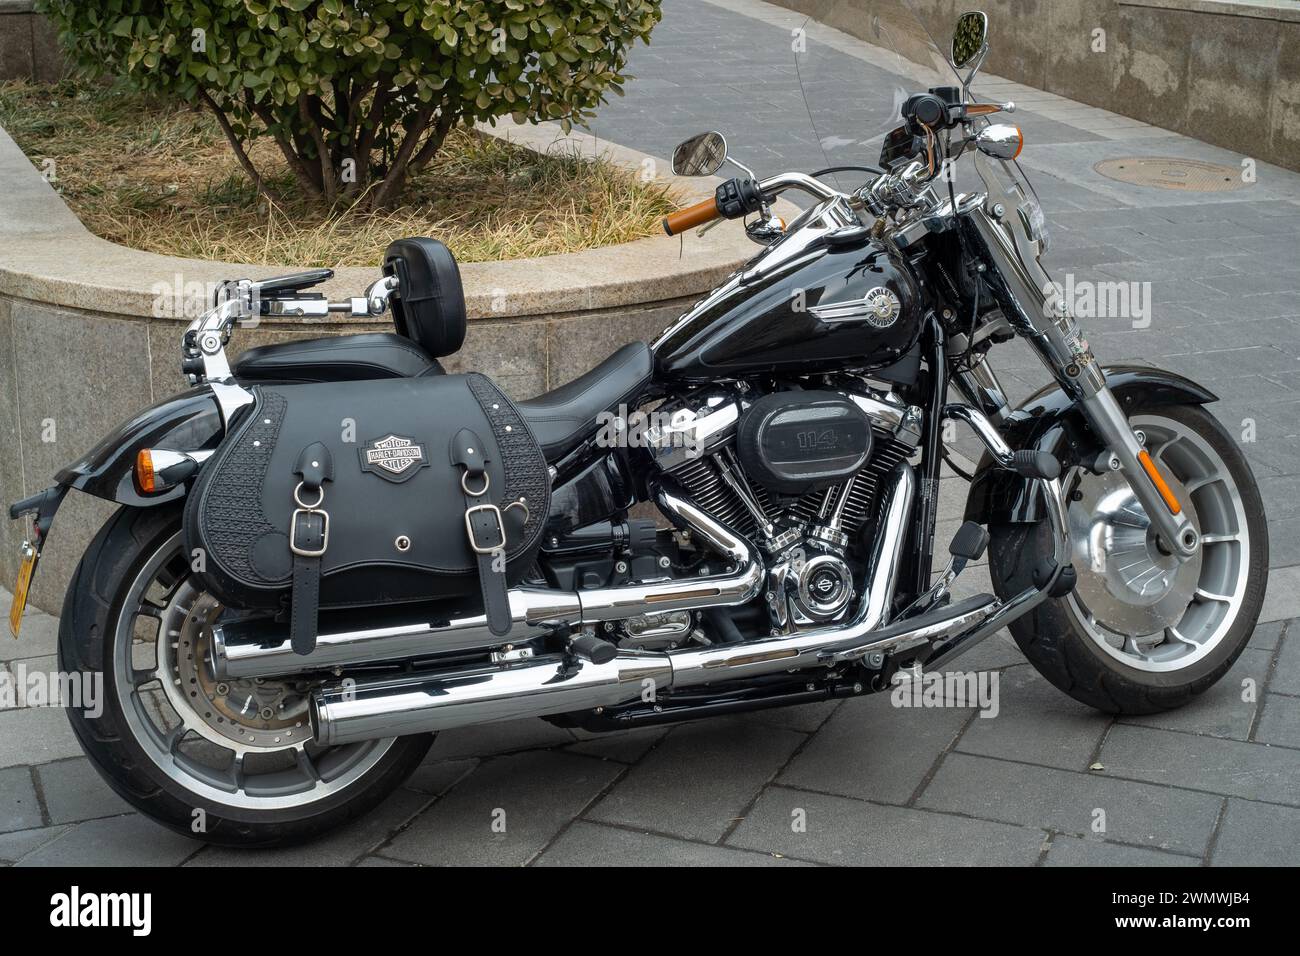 A Harley-Davidson Motorcycle in Beijing, China. Stock Photo